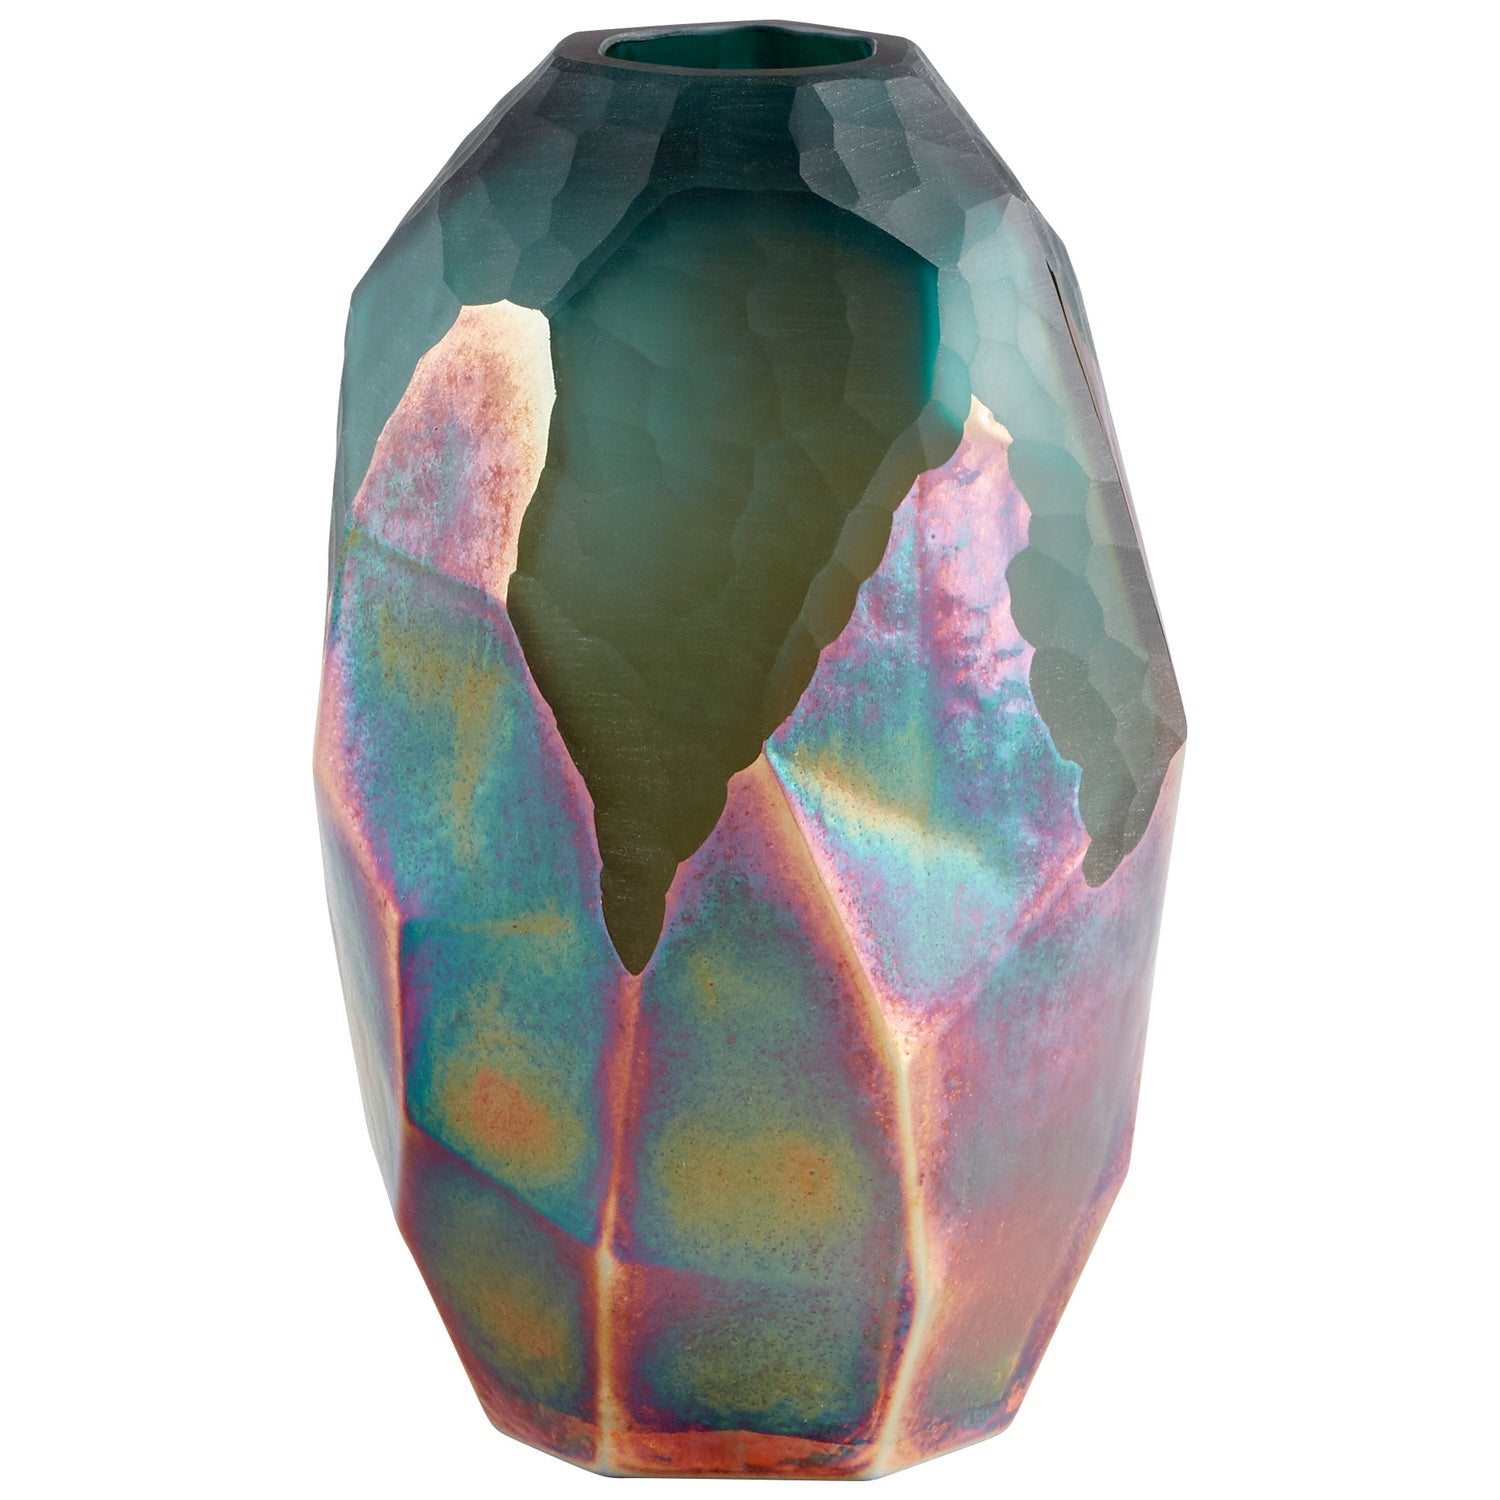 Cyan 11063 Vases & Planters - Green And Gold